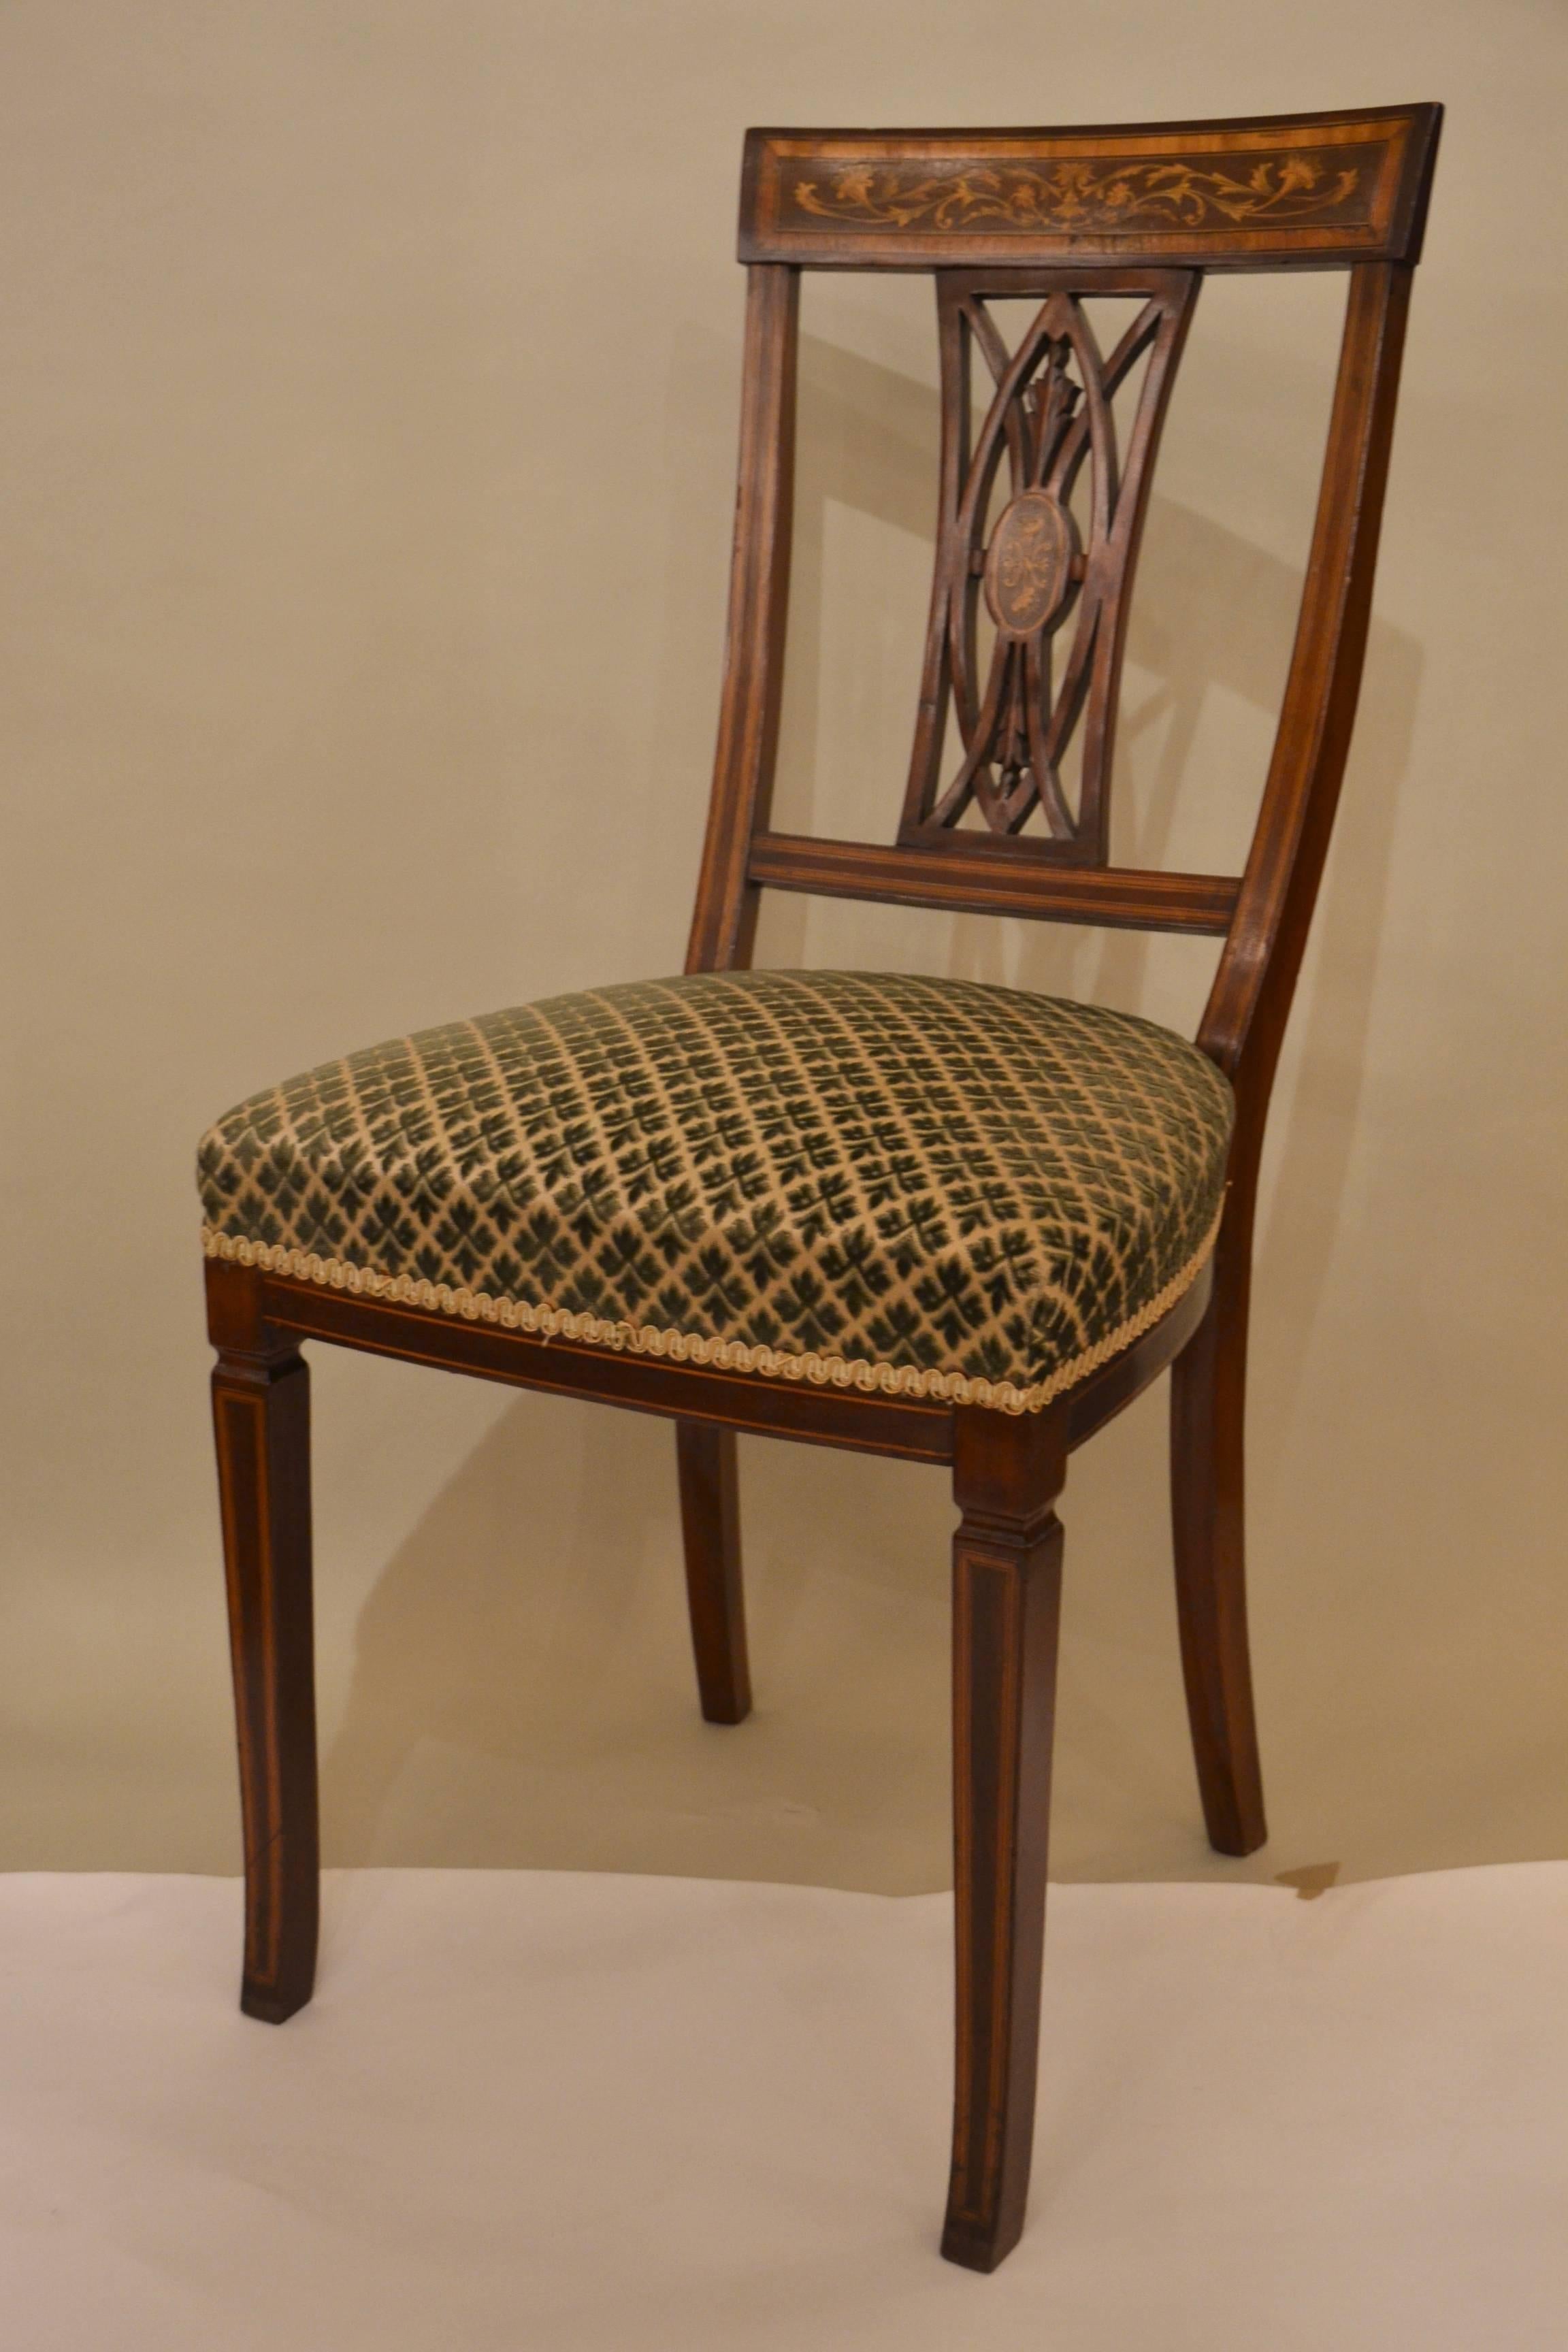 Four antique English inlaid side chairs, circa 1880-1890. Chairs may be sold separately.